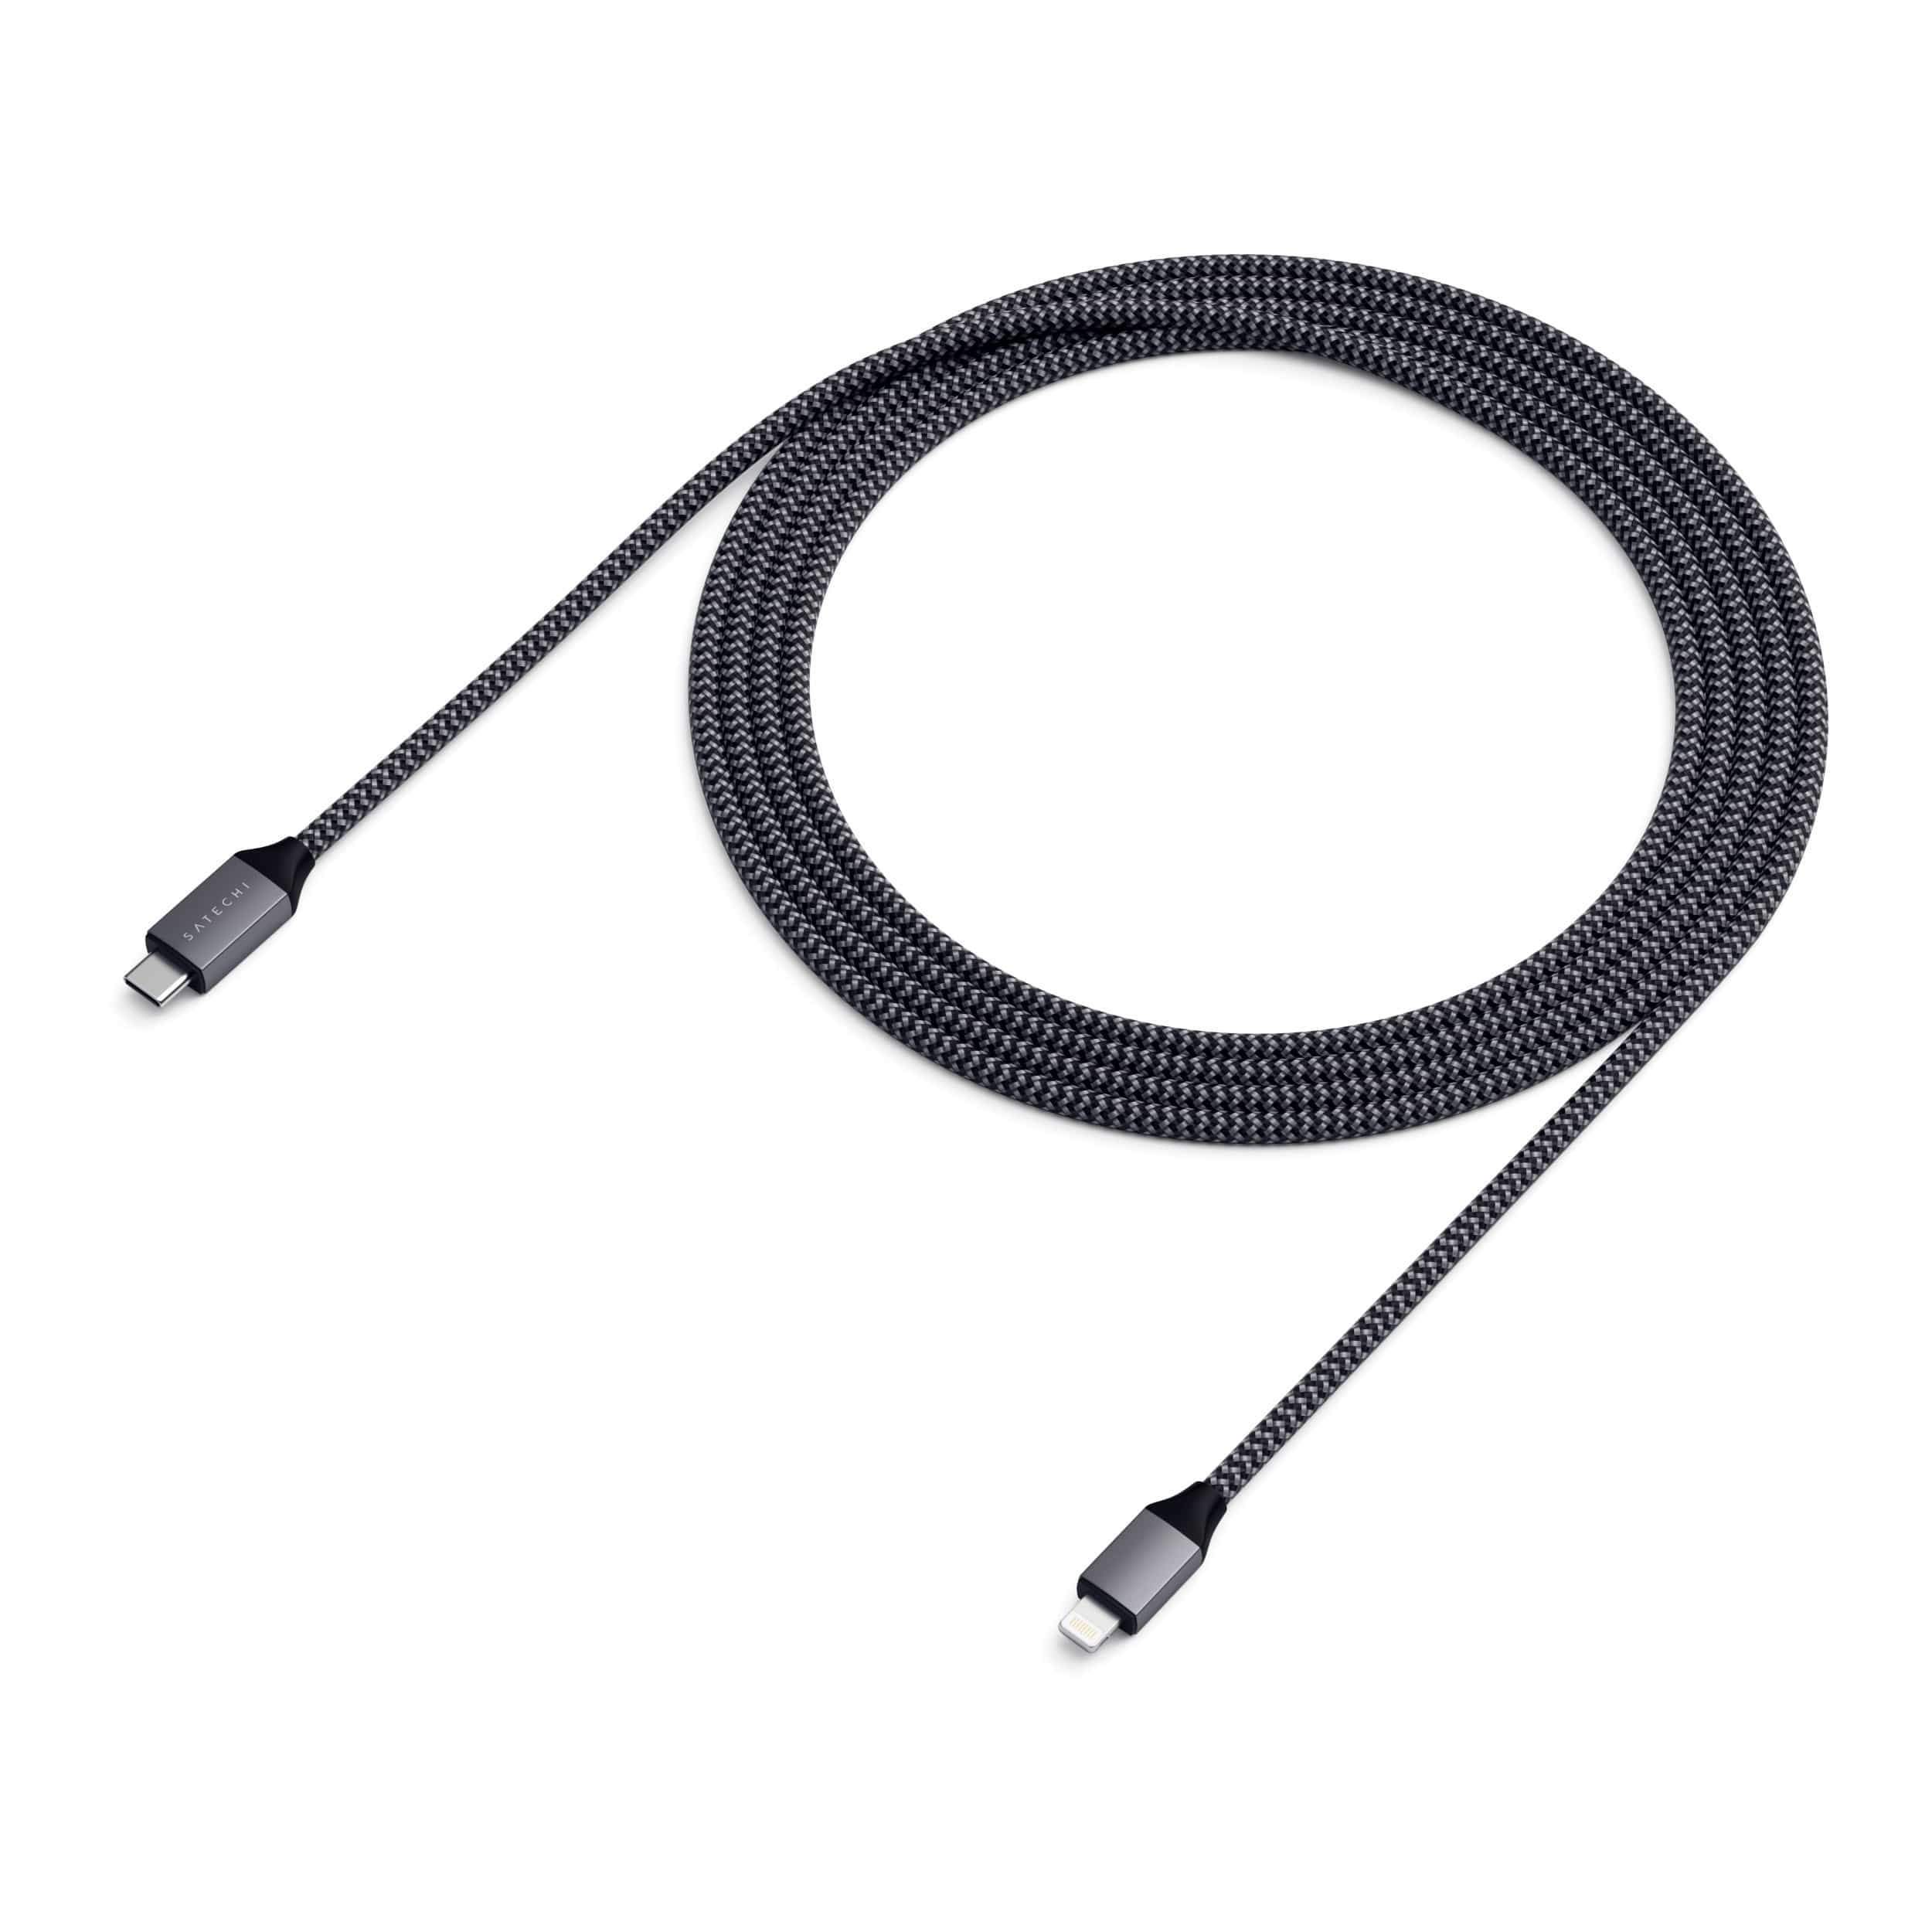 USB-C to Lightning Cable - 10 inches - Satechi